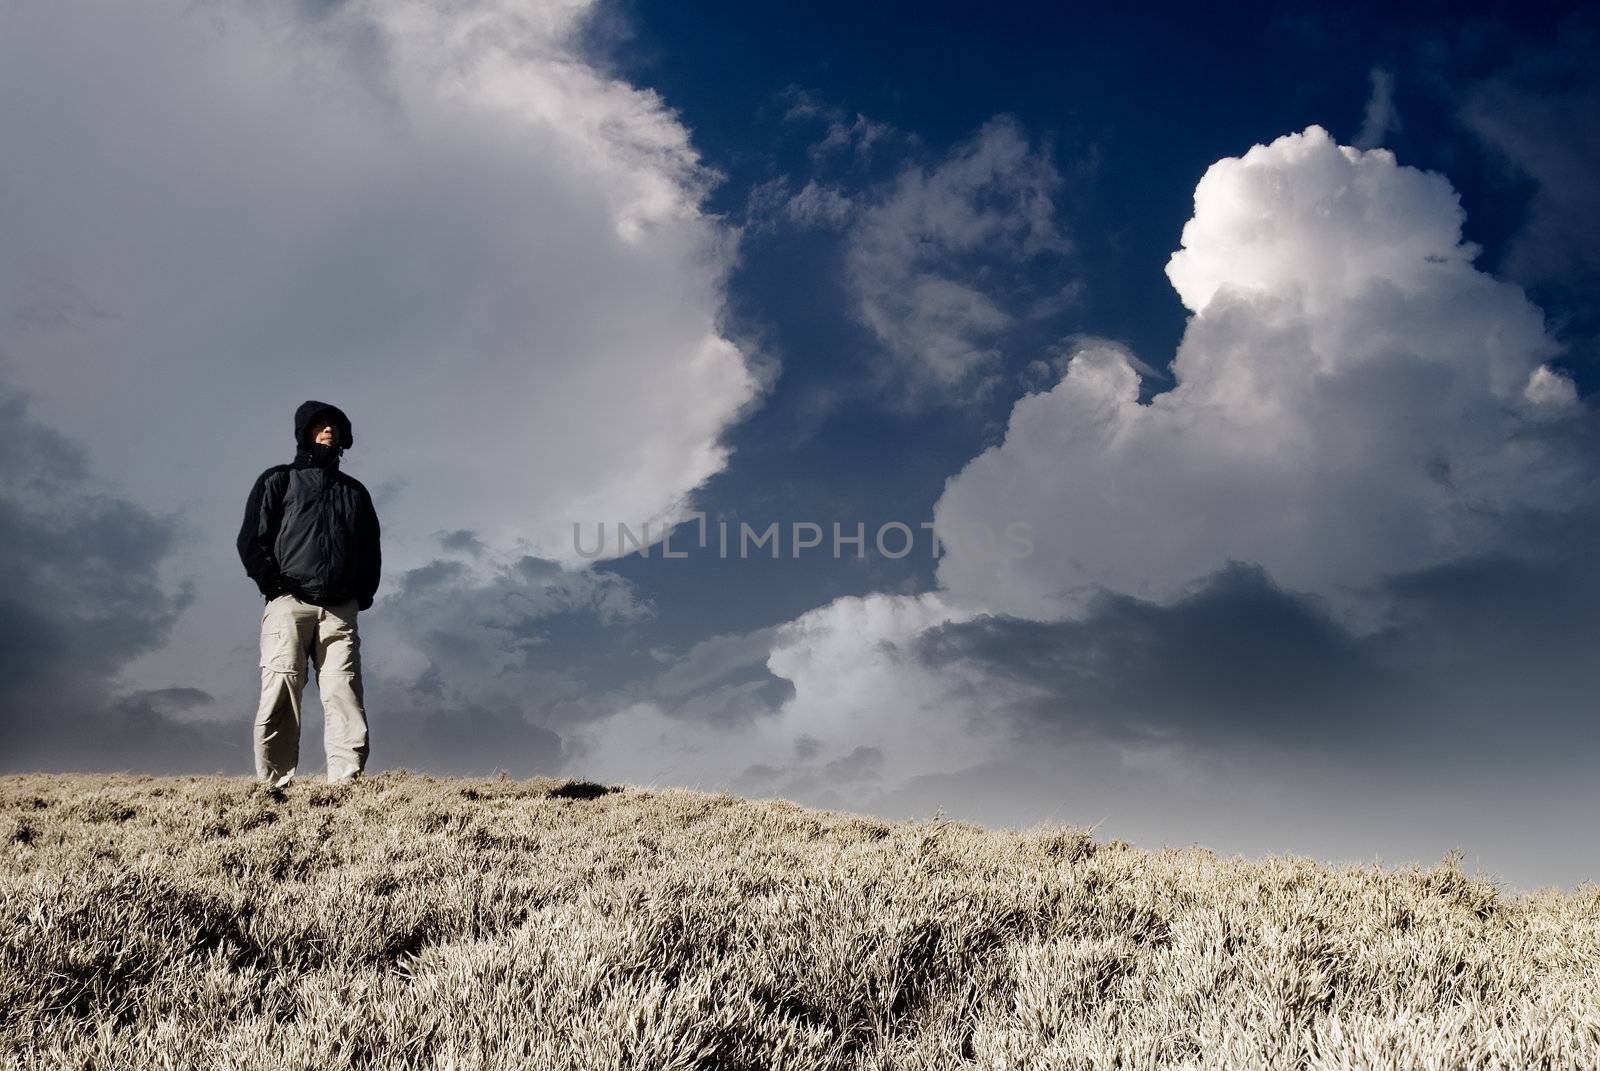 Lonely man stand and watch on the hill with dramatic heaven.